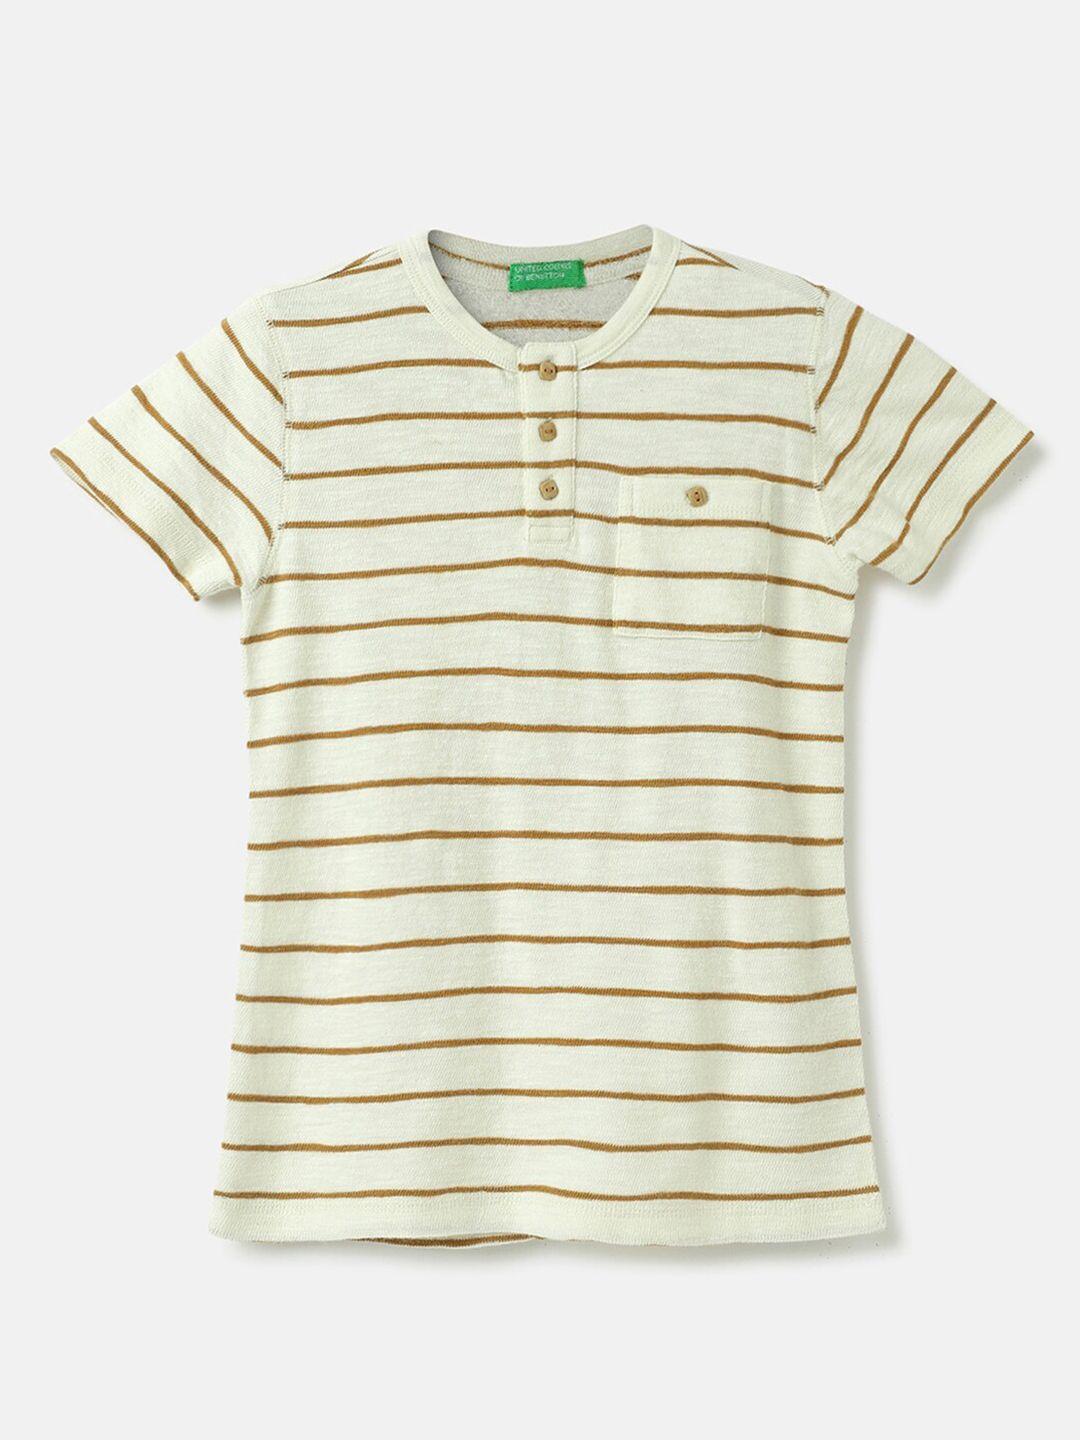 united colors of benetton boys striped henley neck cotton t-shirt